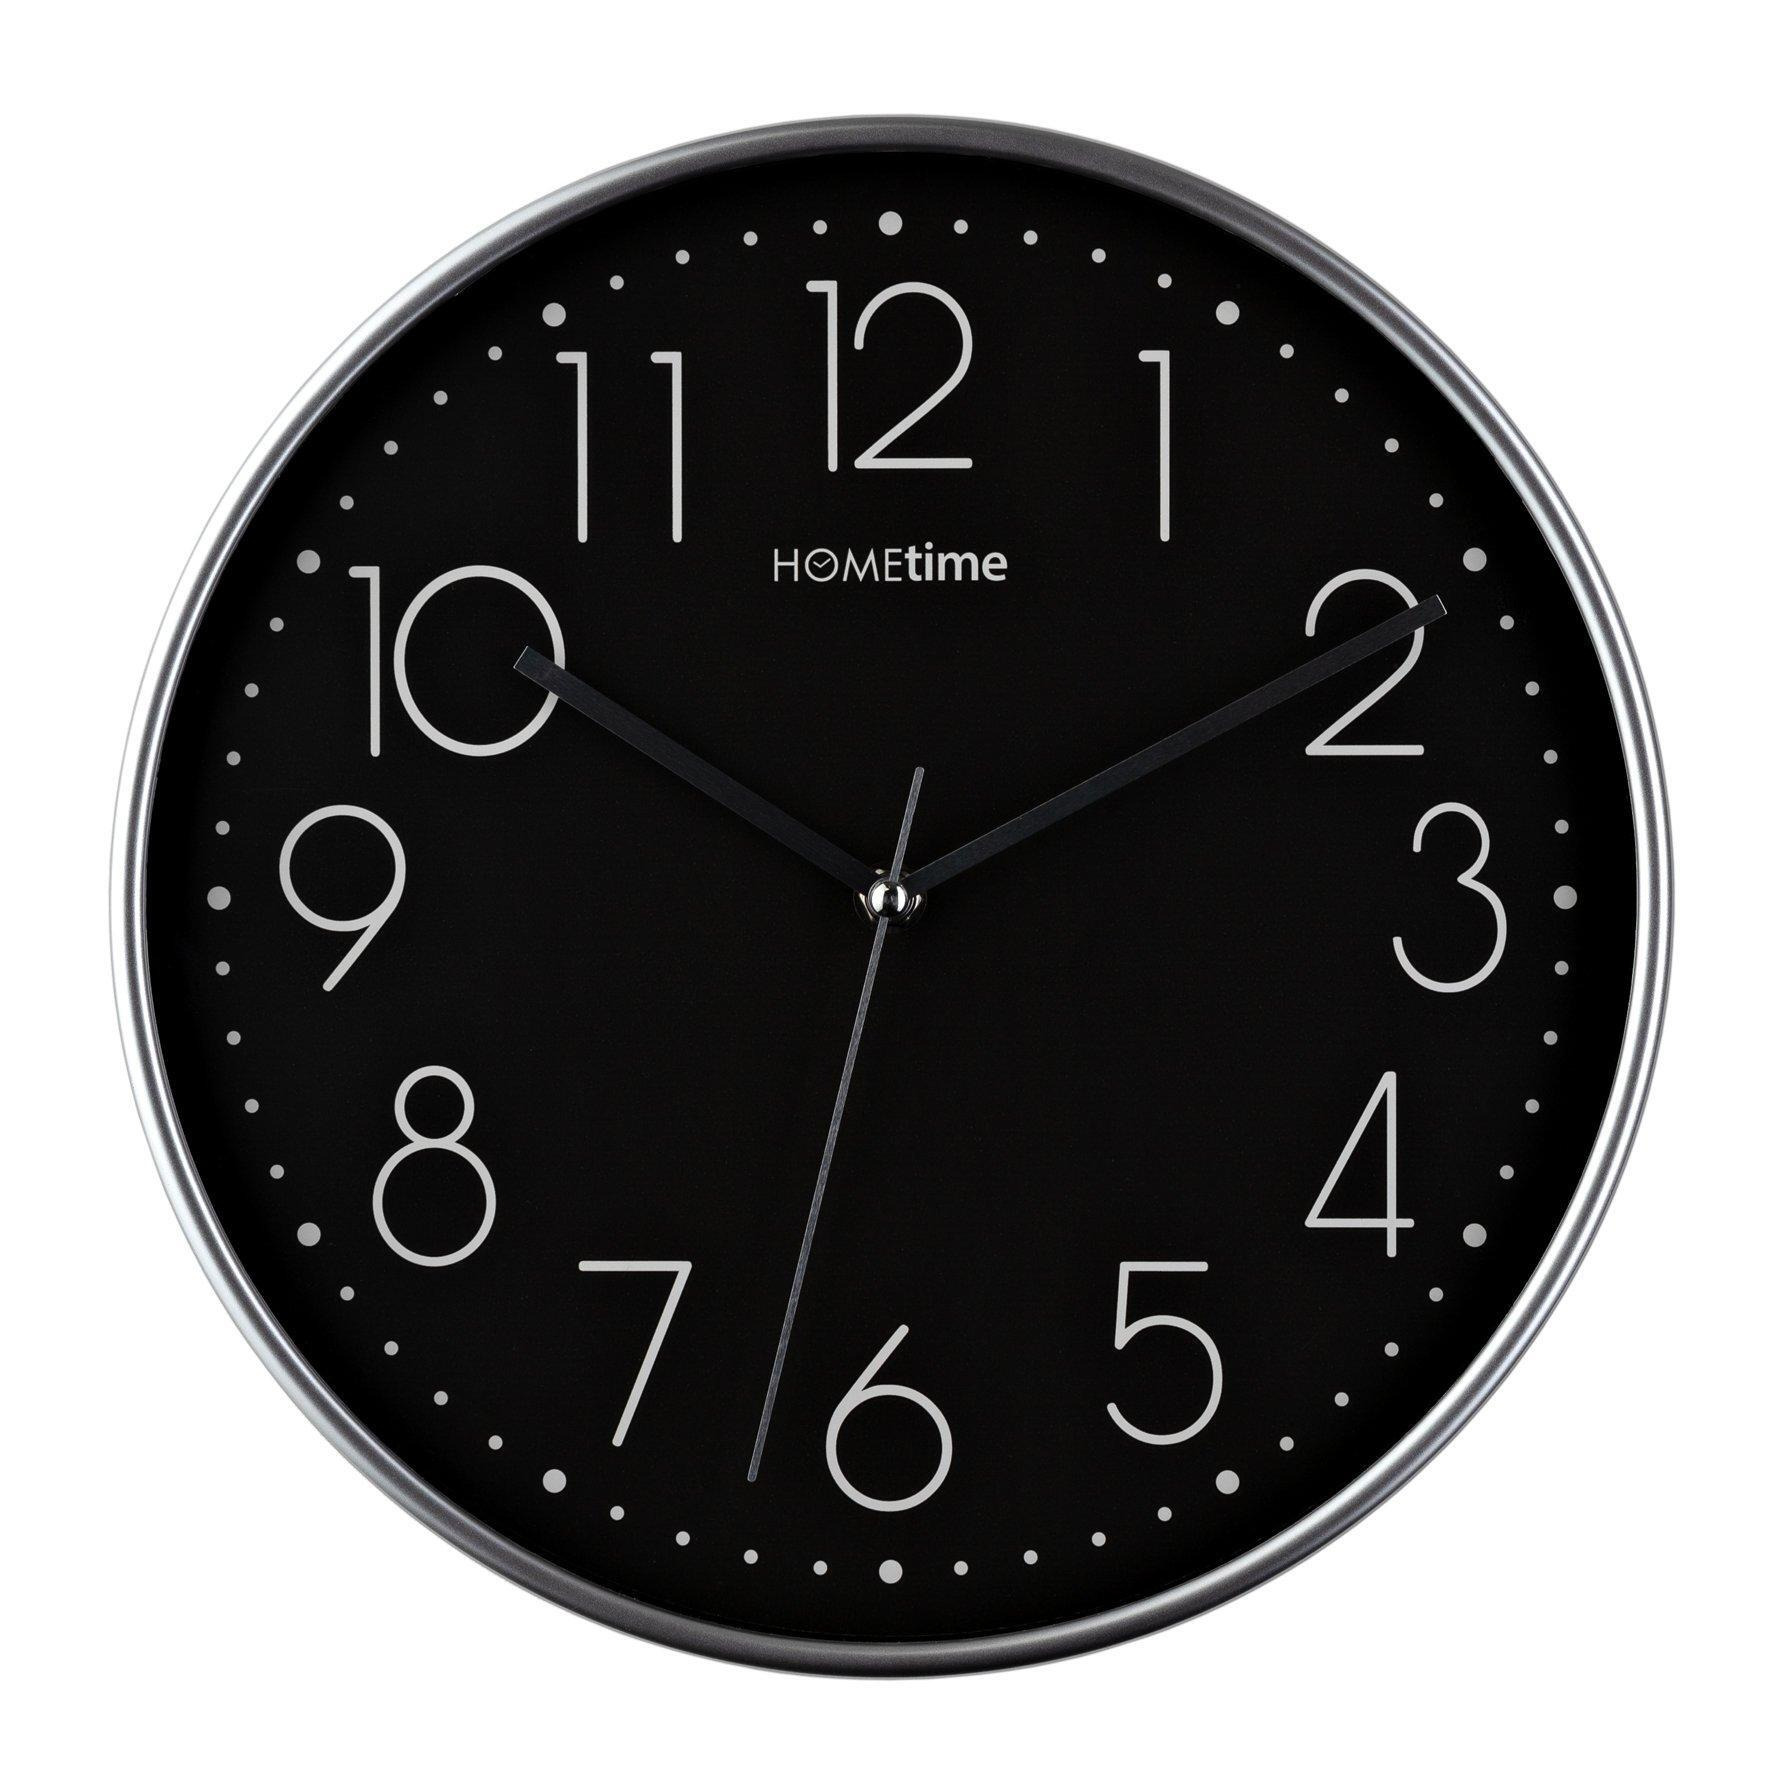 "Hometime Round Black Wall Clock Silver Hands 12""" - image 1